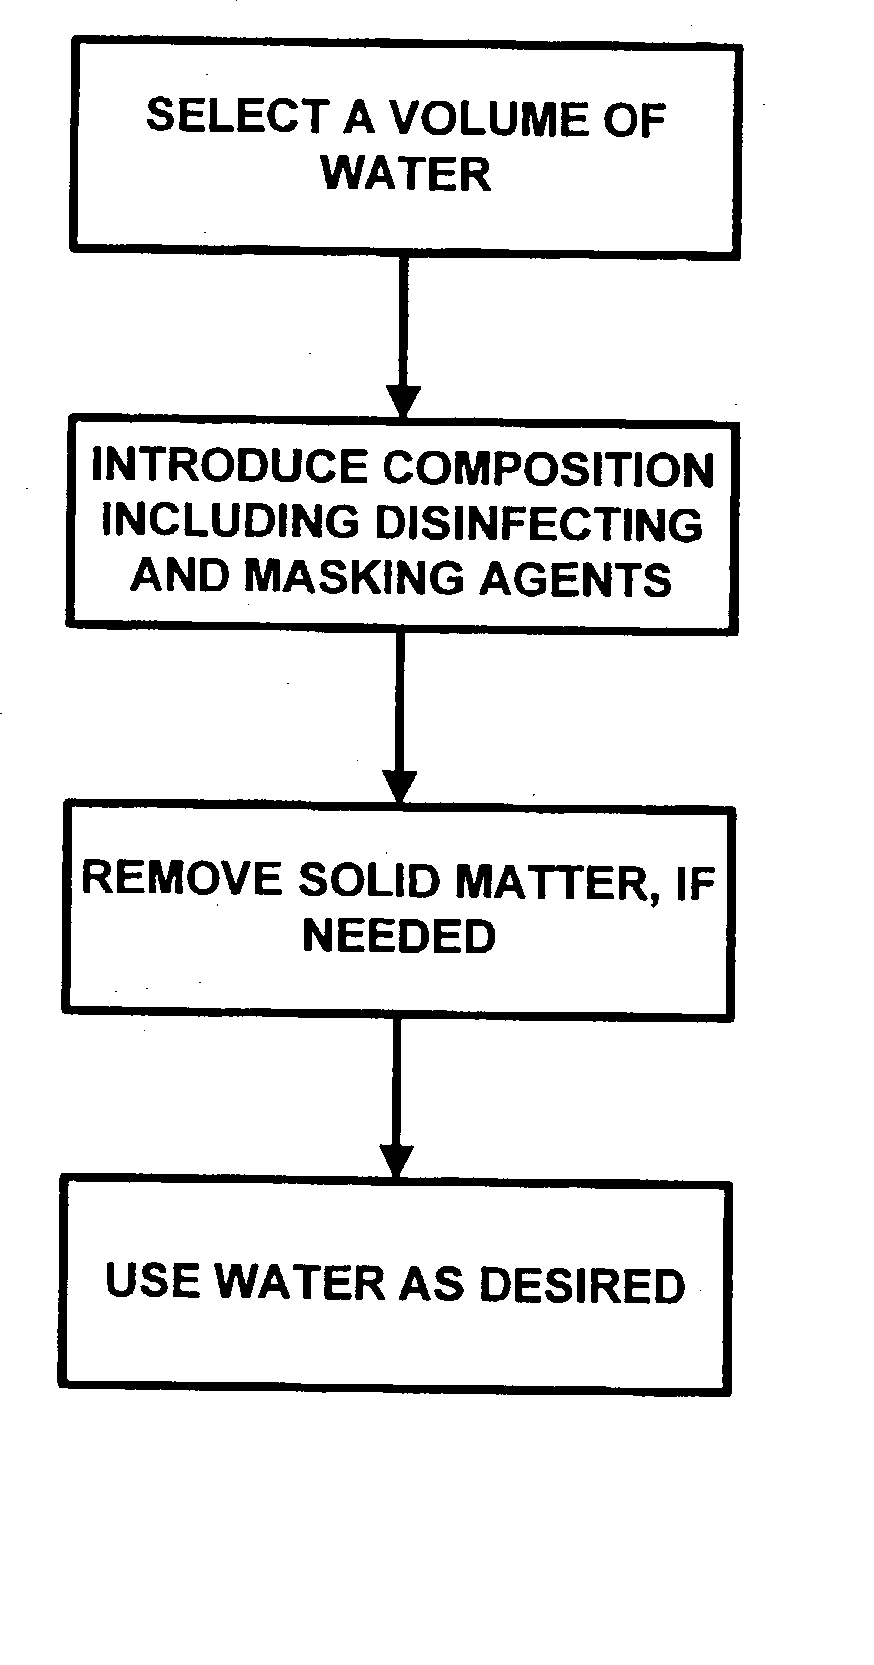 Water treatment compositions with masking agent